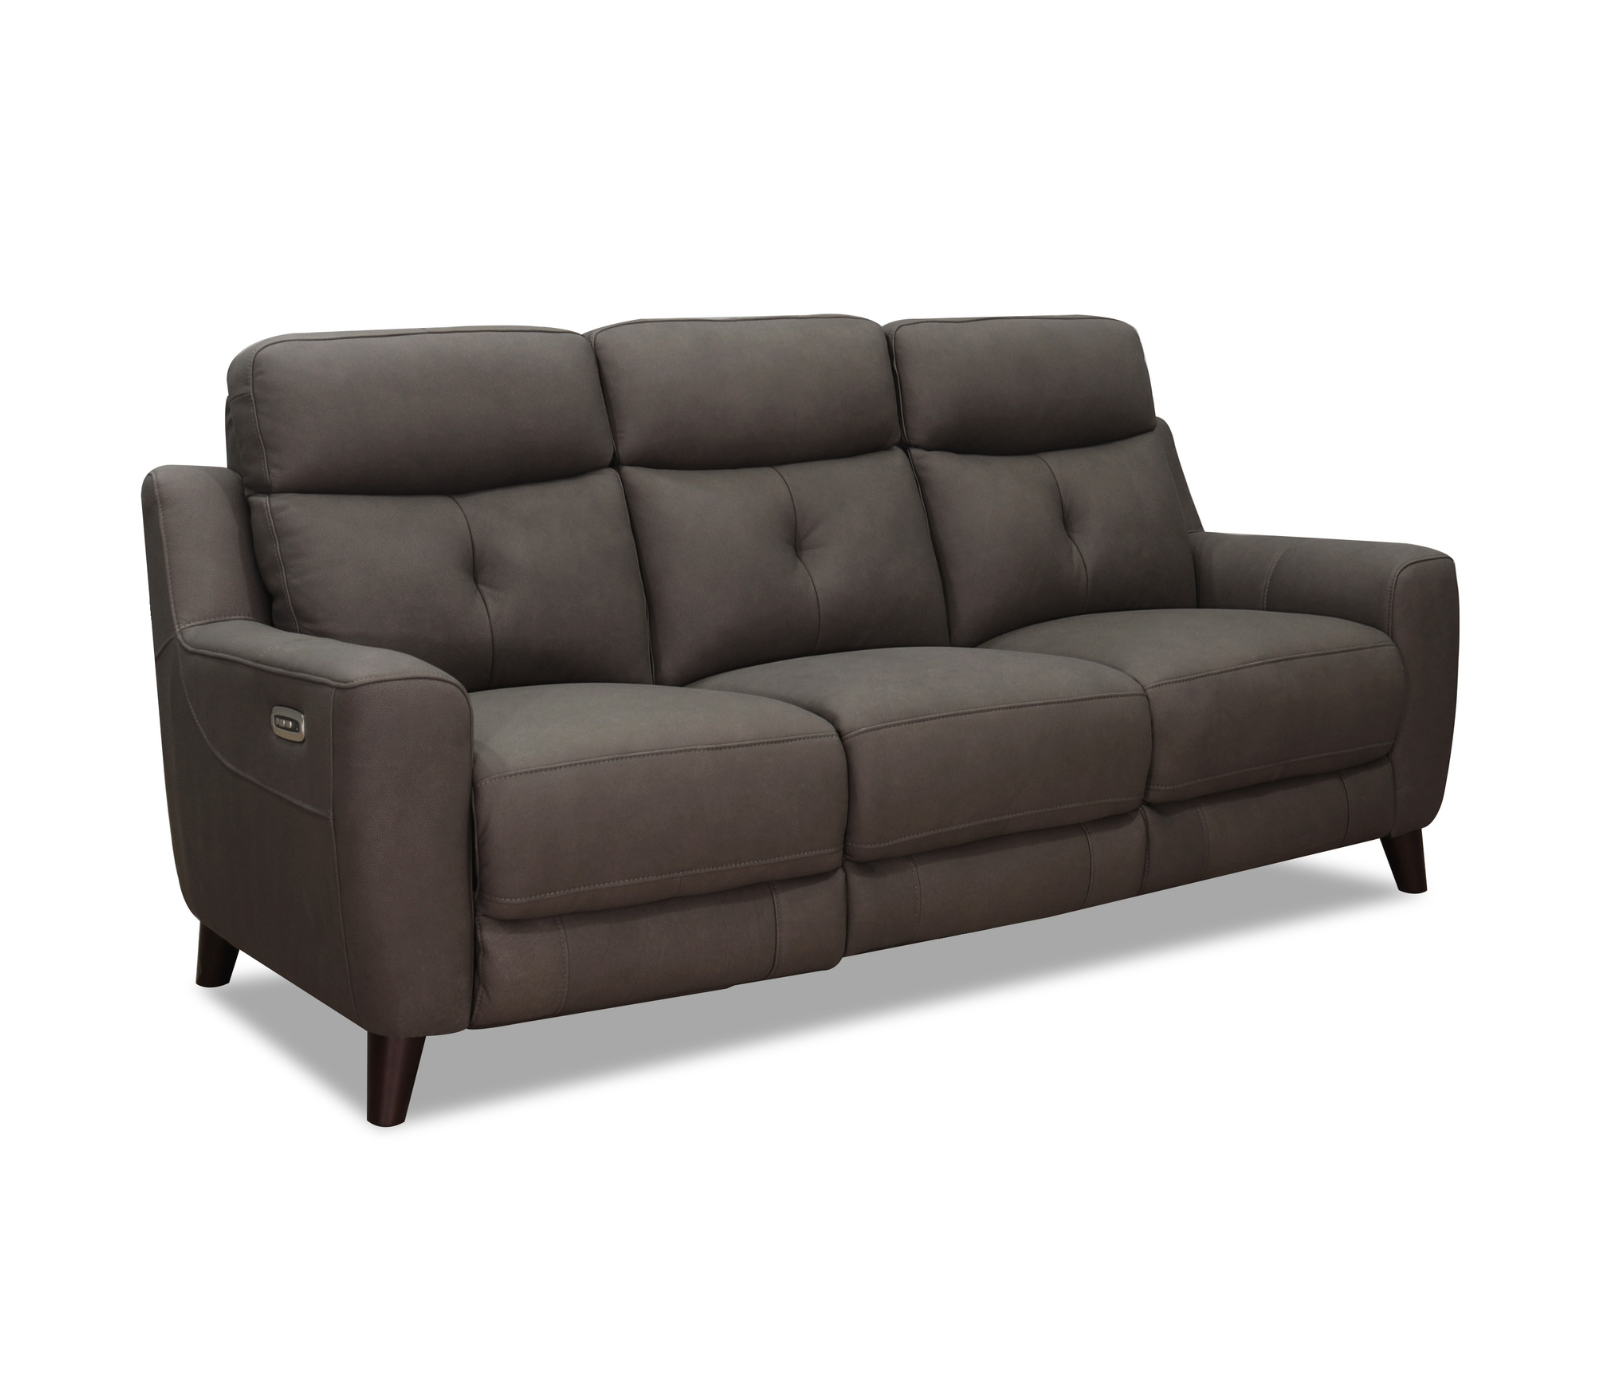 Ritchie Sofa - Power Reclining w/ Power Headrests - Chocolate Leather